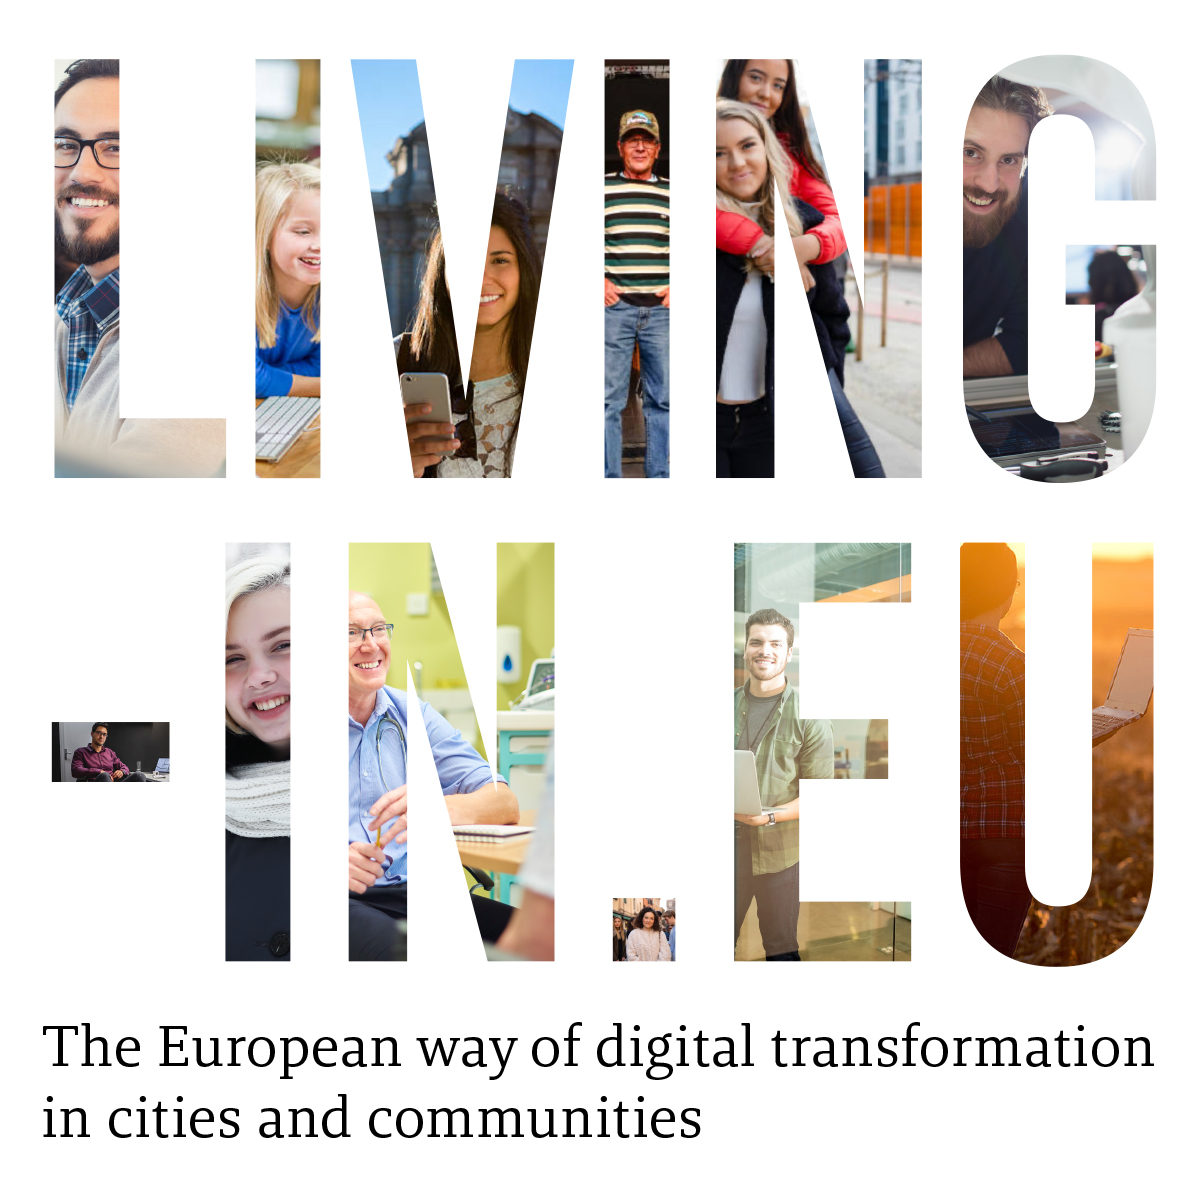 logo of living-in.eu movement, the European way of digital transformation in cities and communities